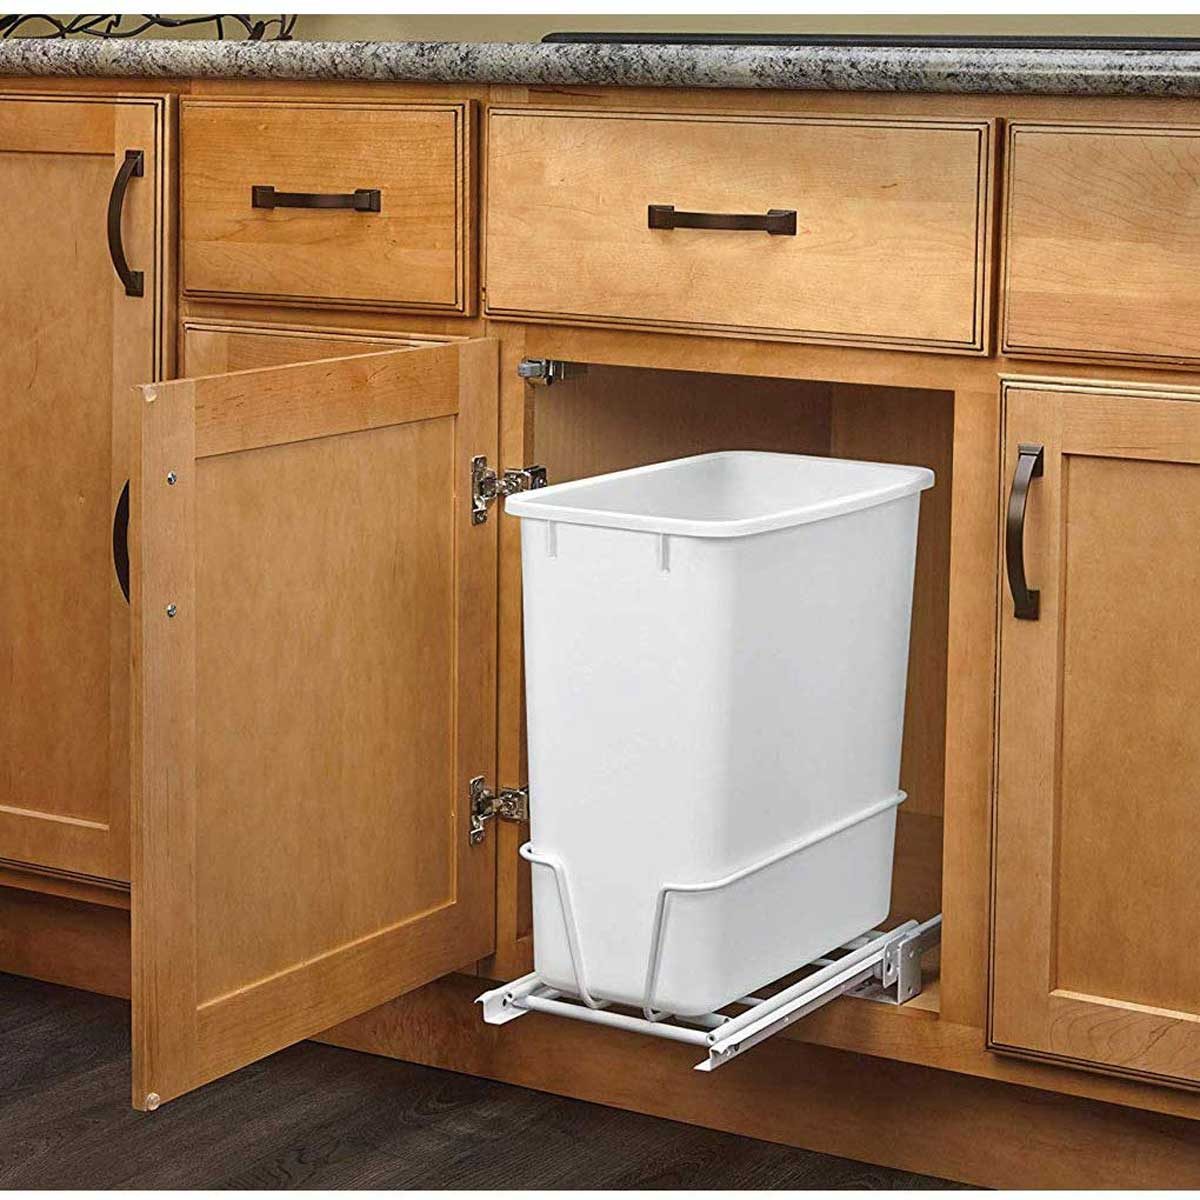 8 Best Pull-Out Trash Cans for Your Kitchen | The Family Handyman